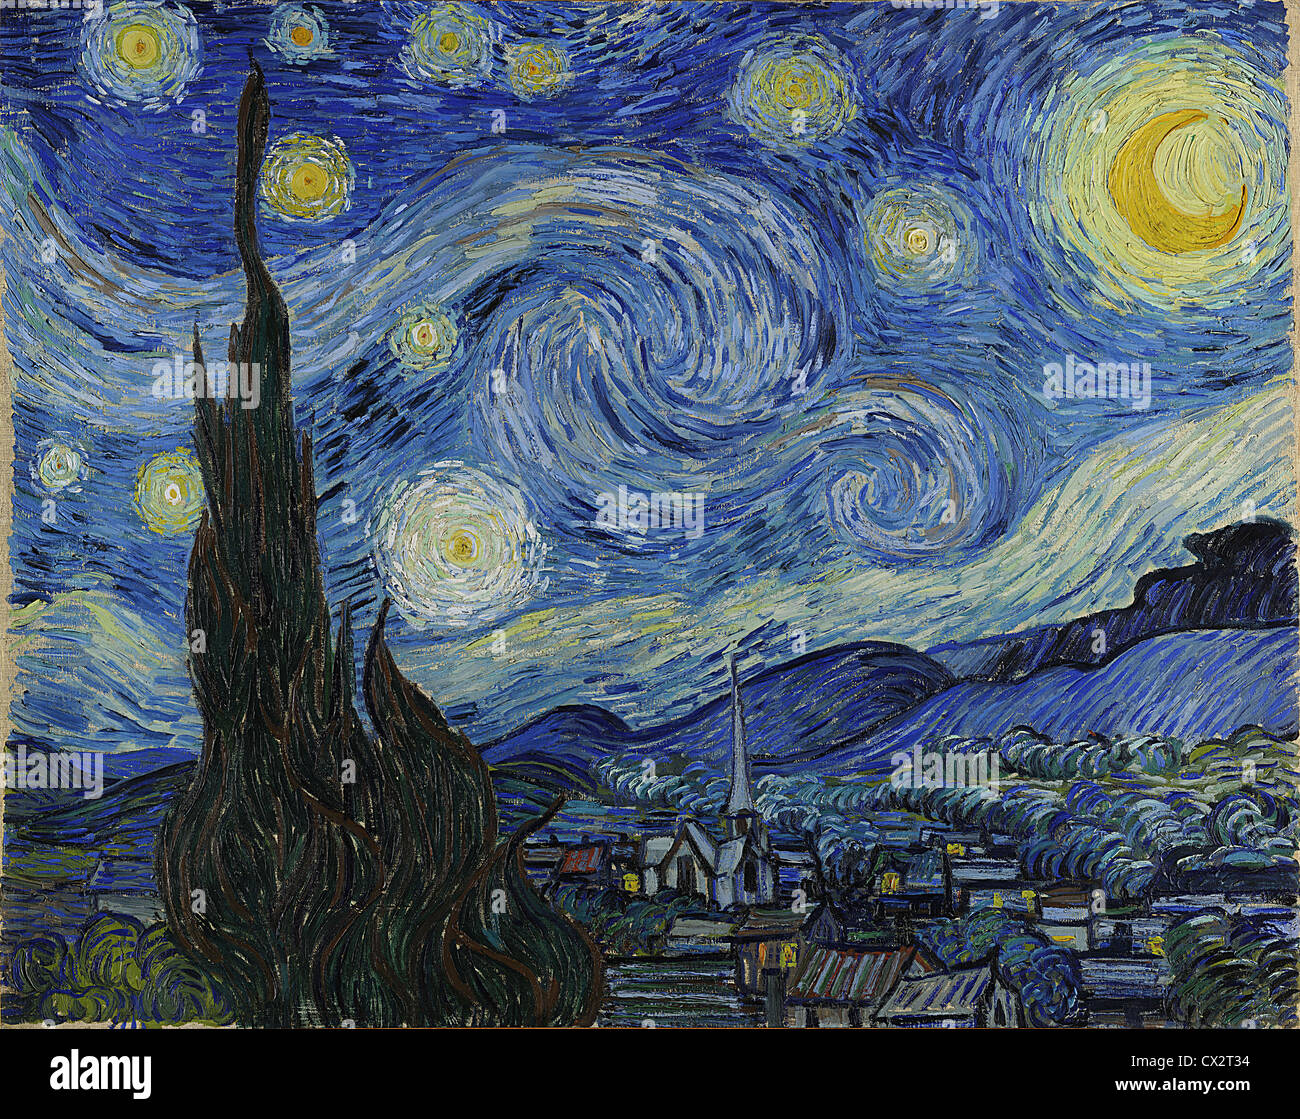 The Starry Night by Vincent van Gogh - Very high quality image of this masterpiece painting. Stock Photo